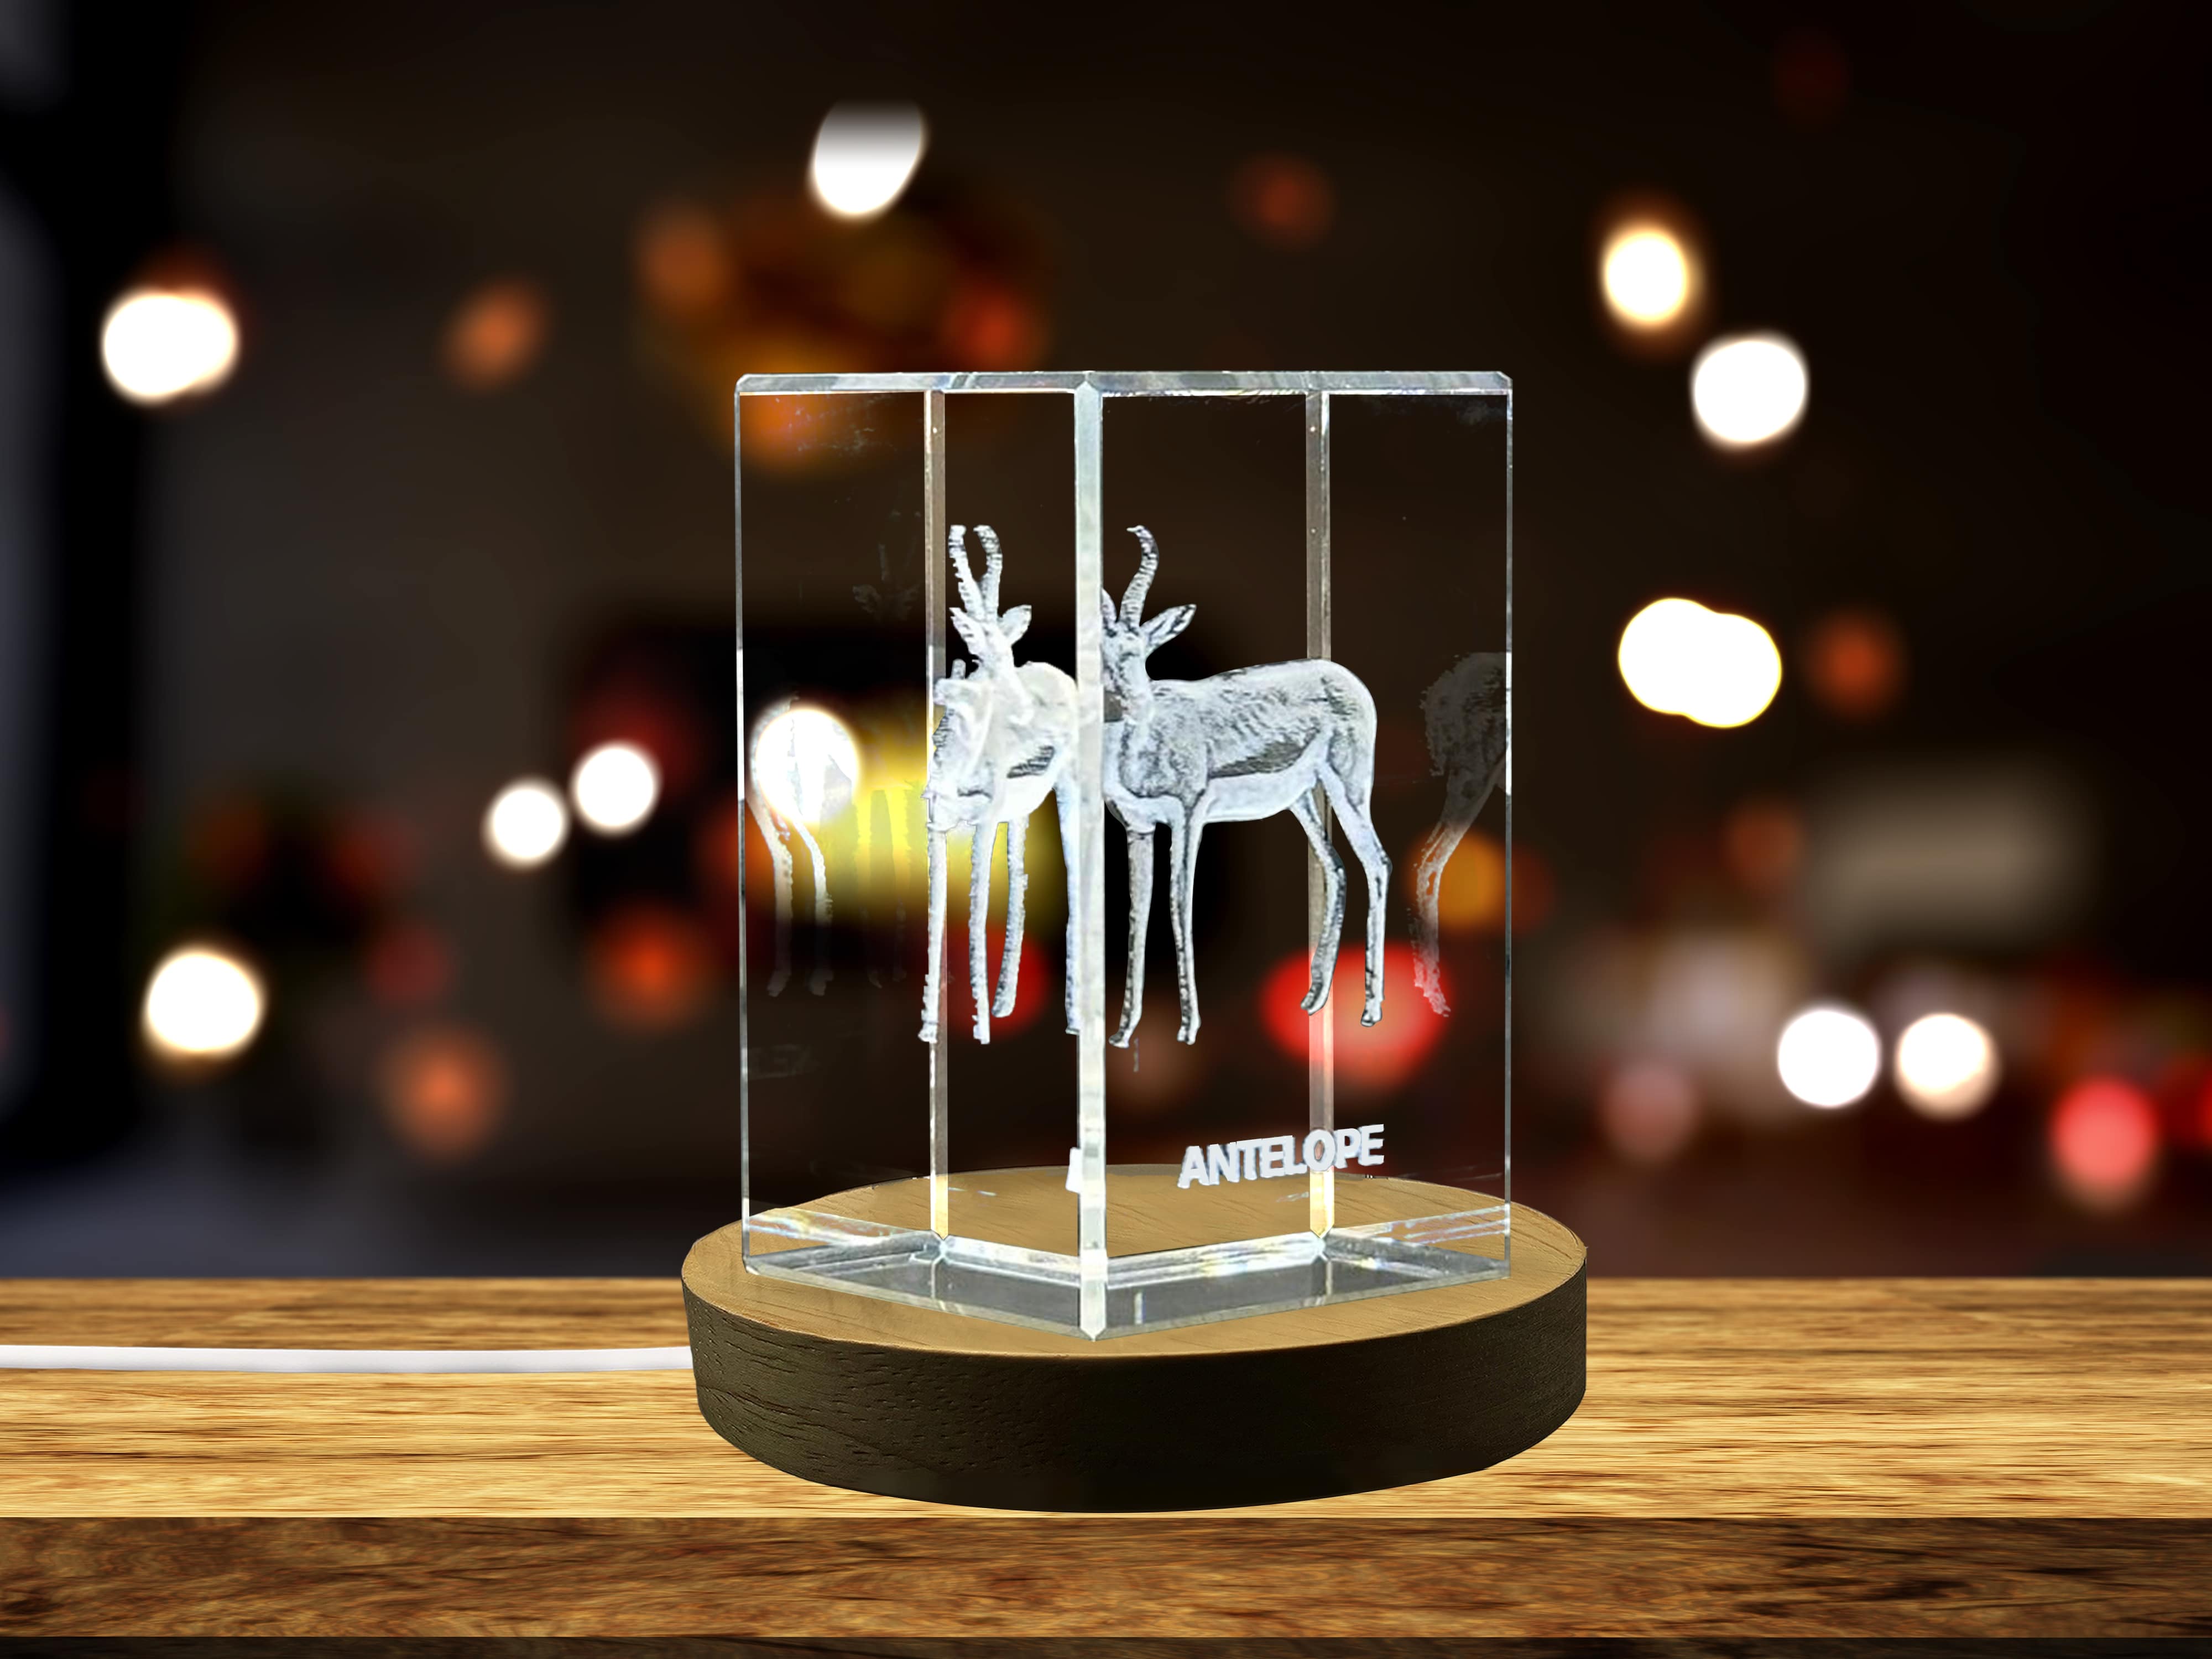 Unique 3D Engraved Crystal with Antelope Design - Perfect Gift for Animal Lovers A&B Crystal Collection